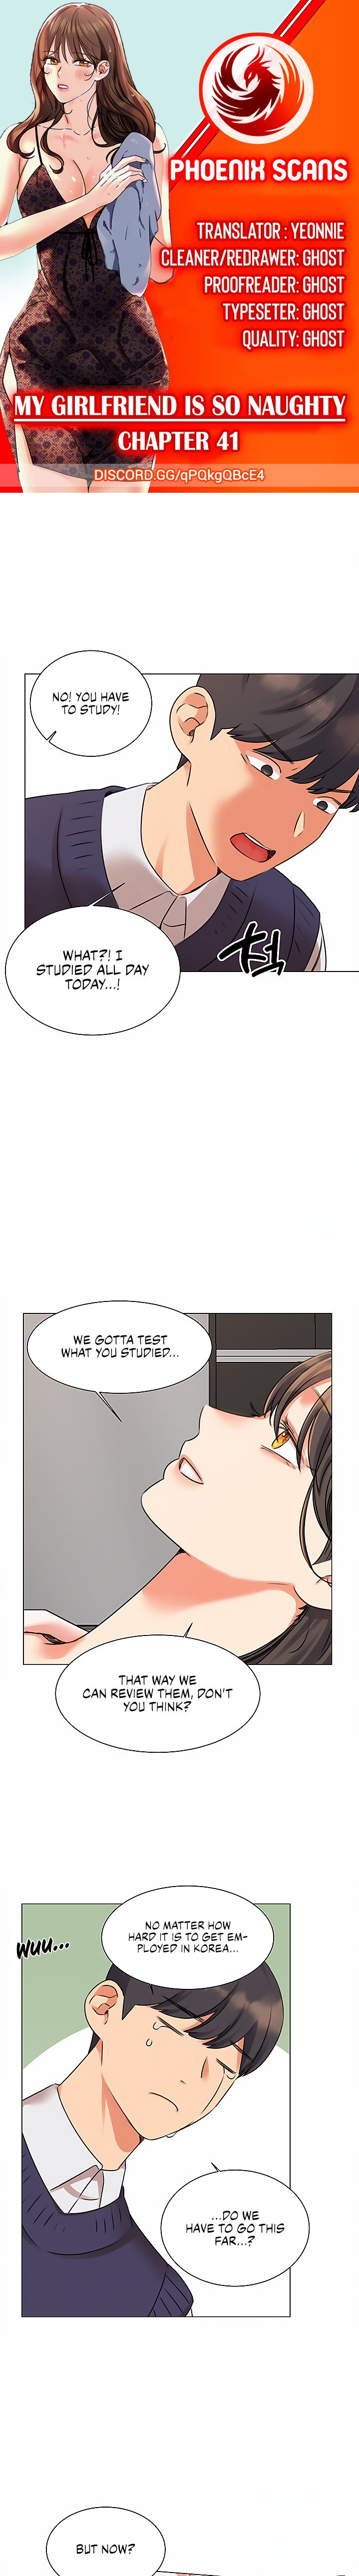 My girlfriend is so naughty Chapter 41 - Page 1